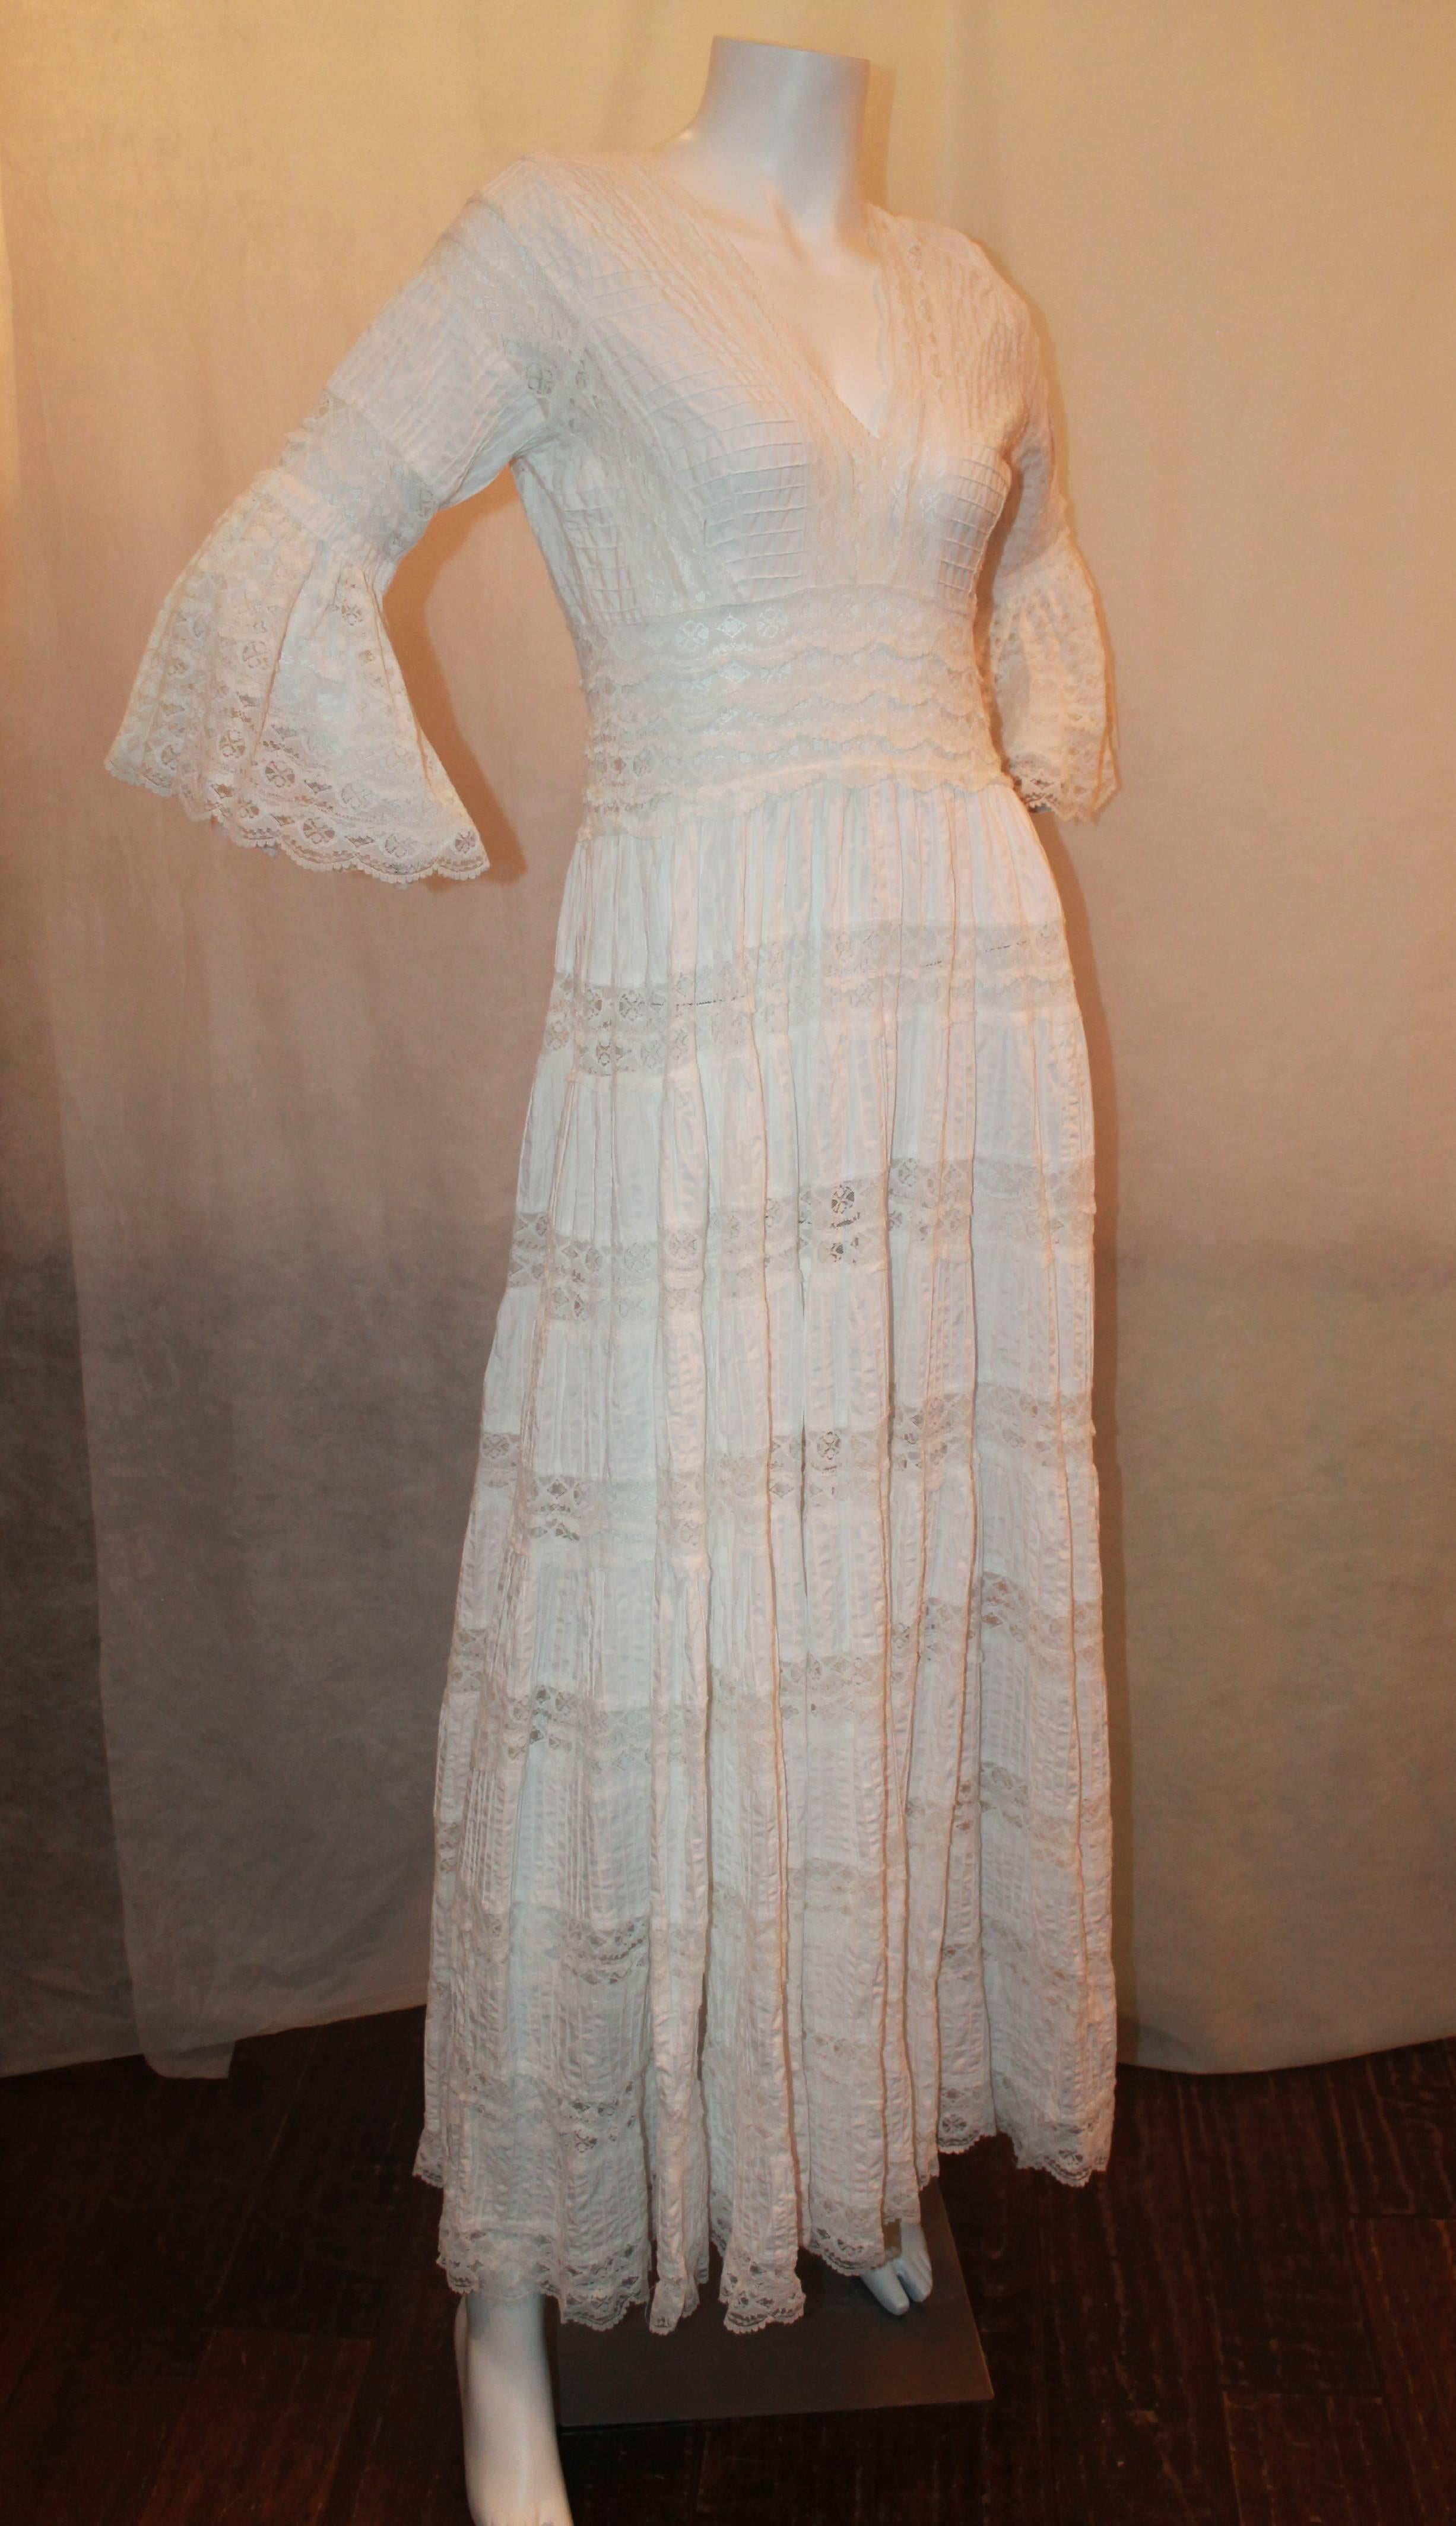 1970's Vintage White Lace & Cotton Mexican Wedding Dress - M. This maxi dress is in excellent vintage condition and has a 3/4 sleeve. It also has  